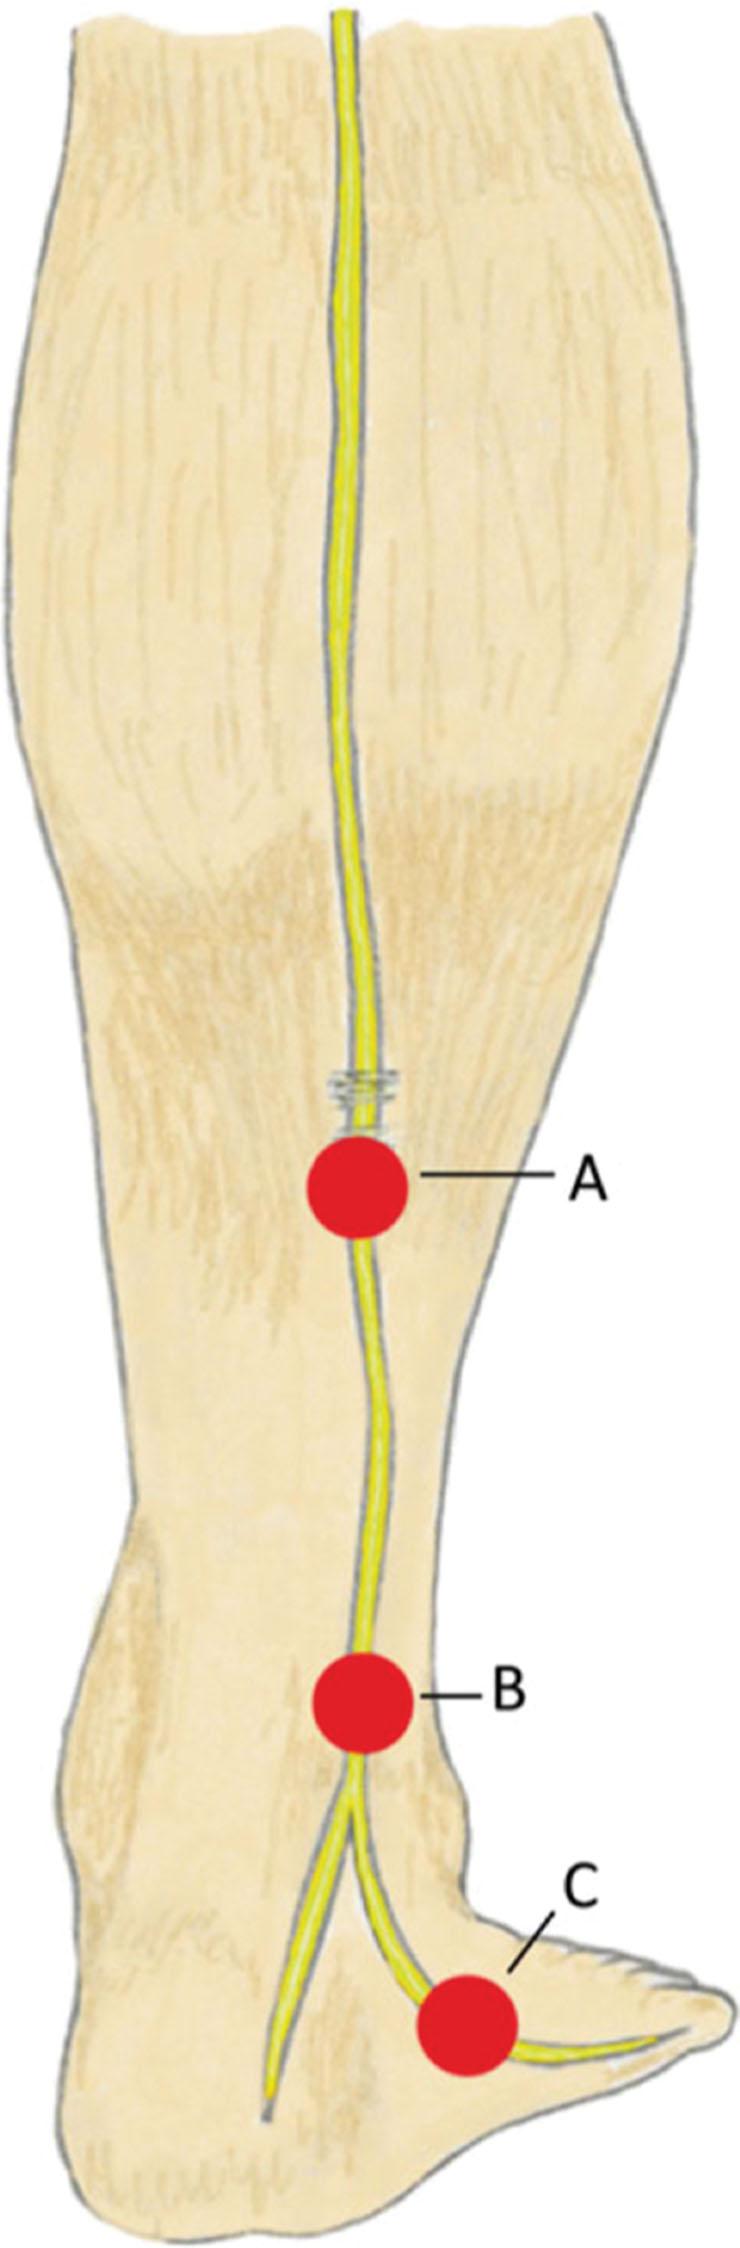 Figure 30.4, Sites of entrapment of the sural nerve. A = Midcalf between the heads of gastrocnemius; B = fibrous arcade superficial to the Achilles tendon; C = lateral foot.